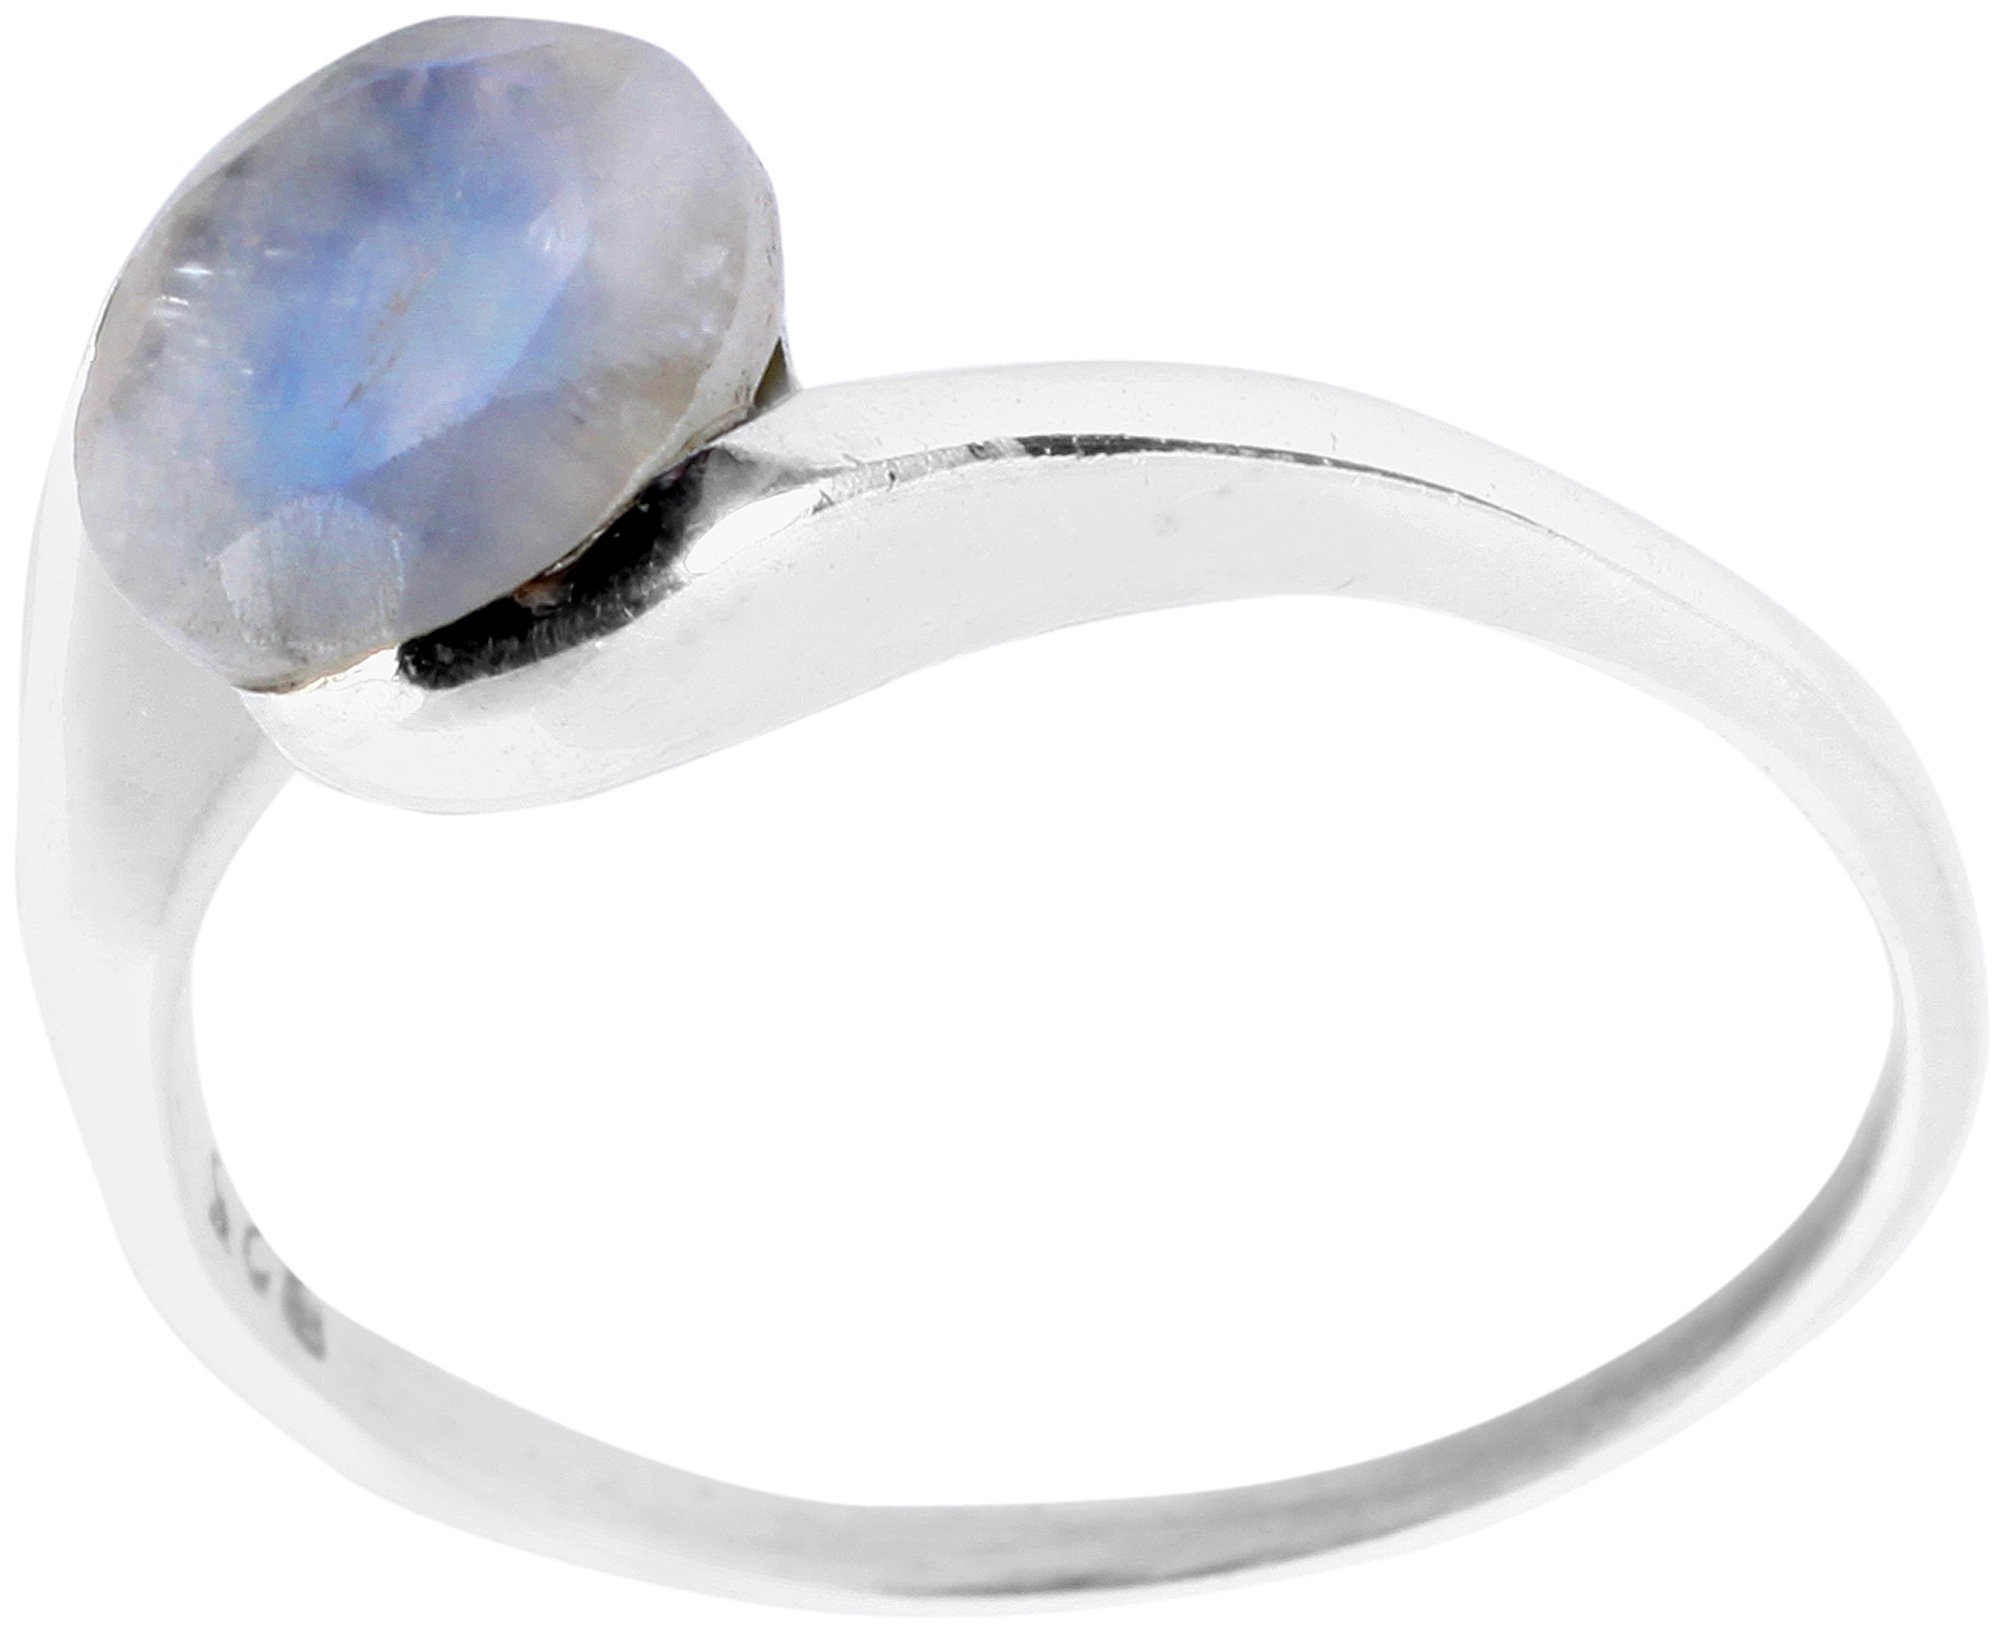 Faceted Rainbow Moonstone Ring | Exotic India Art